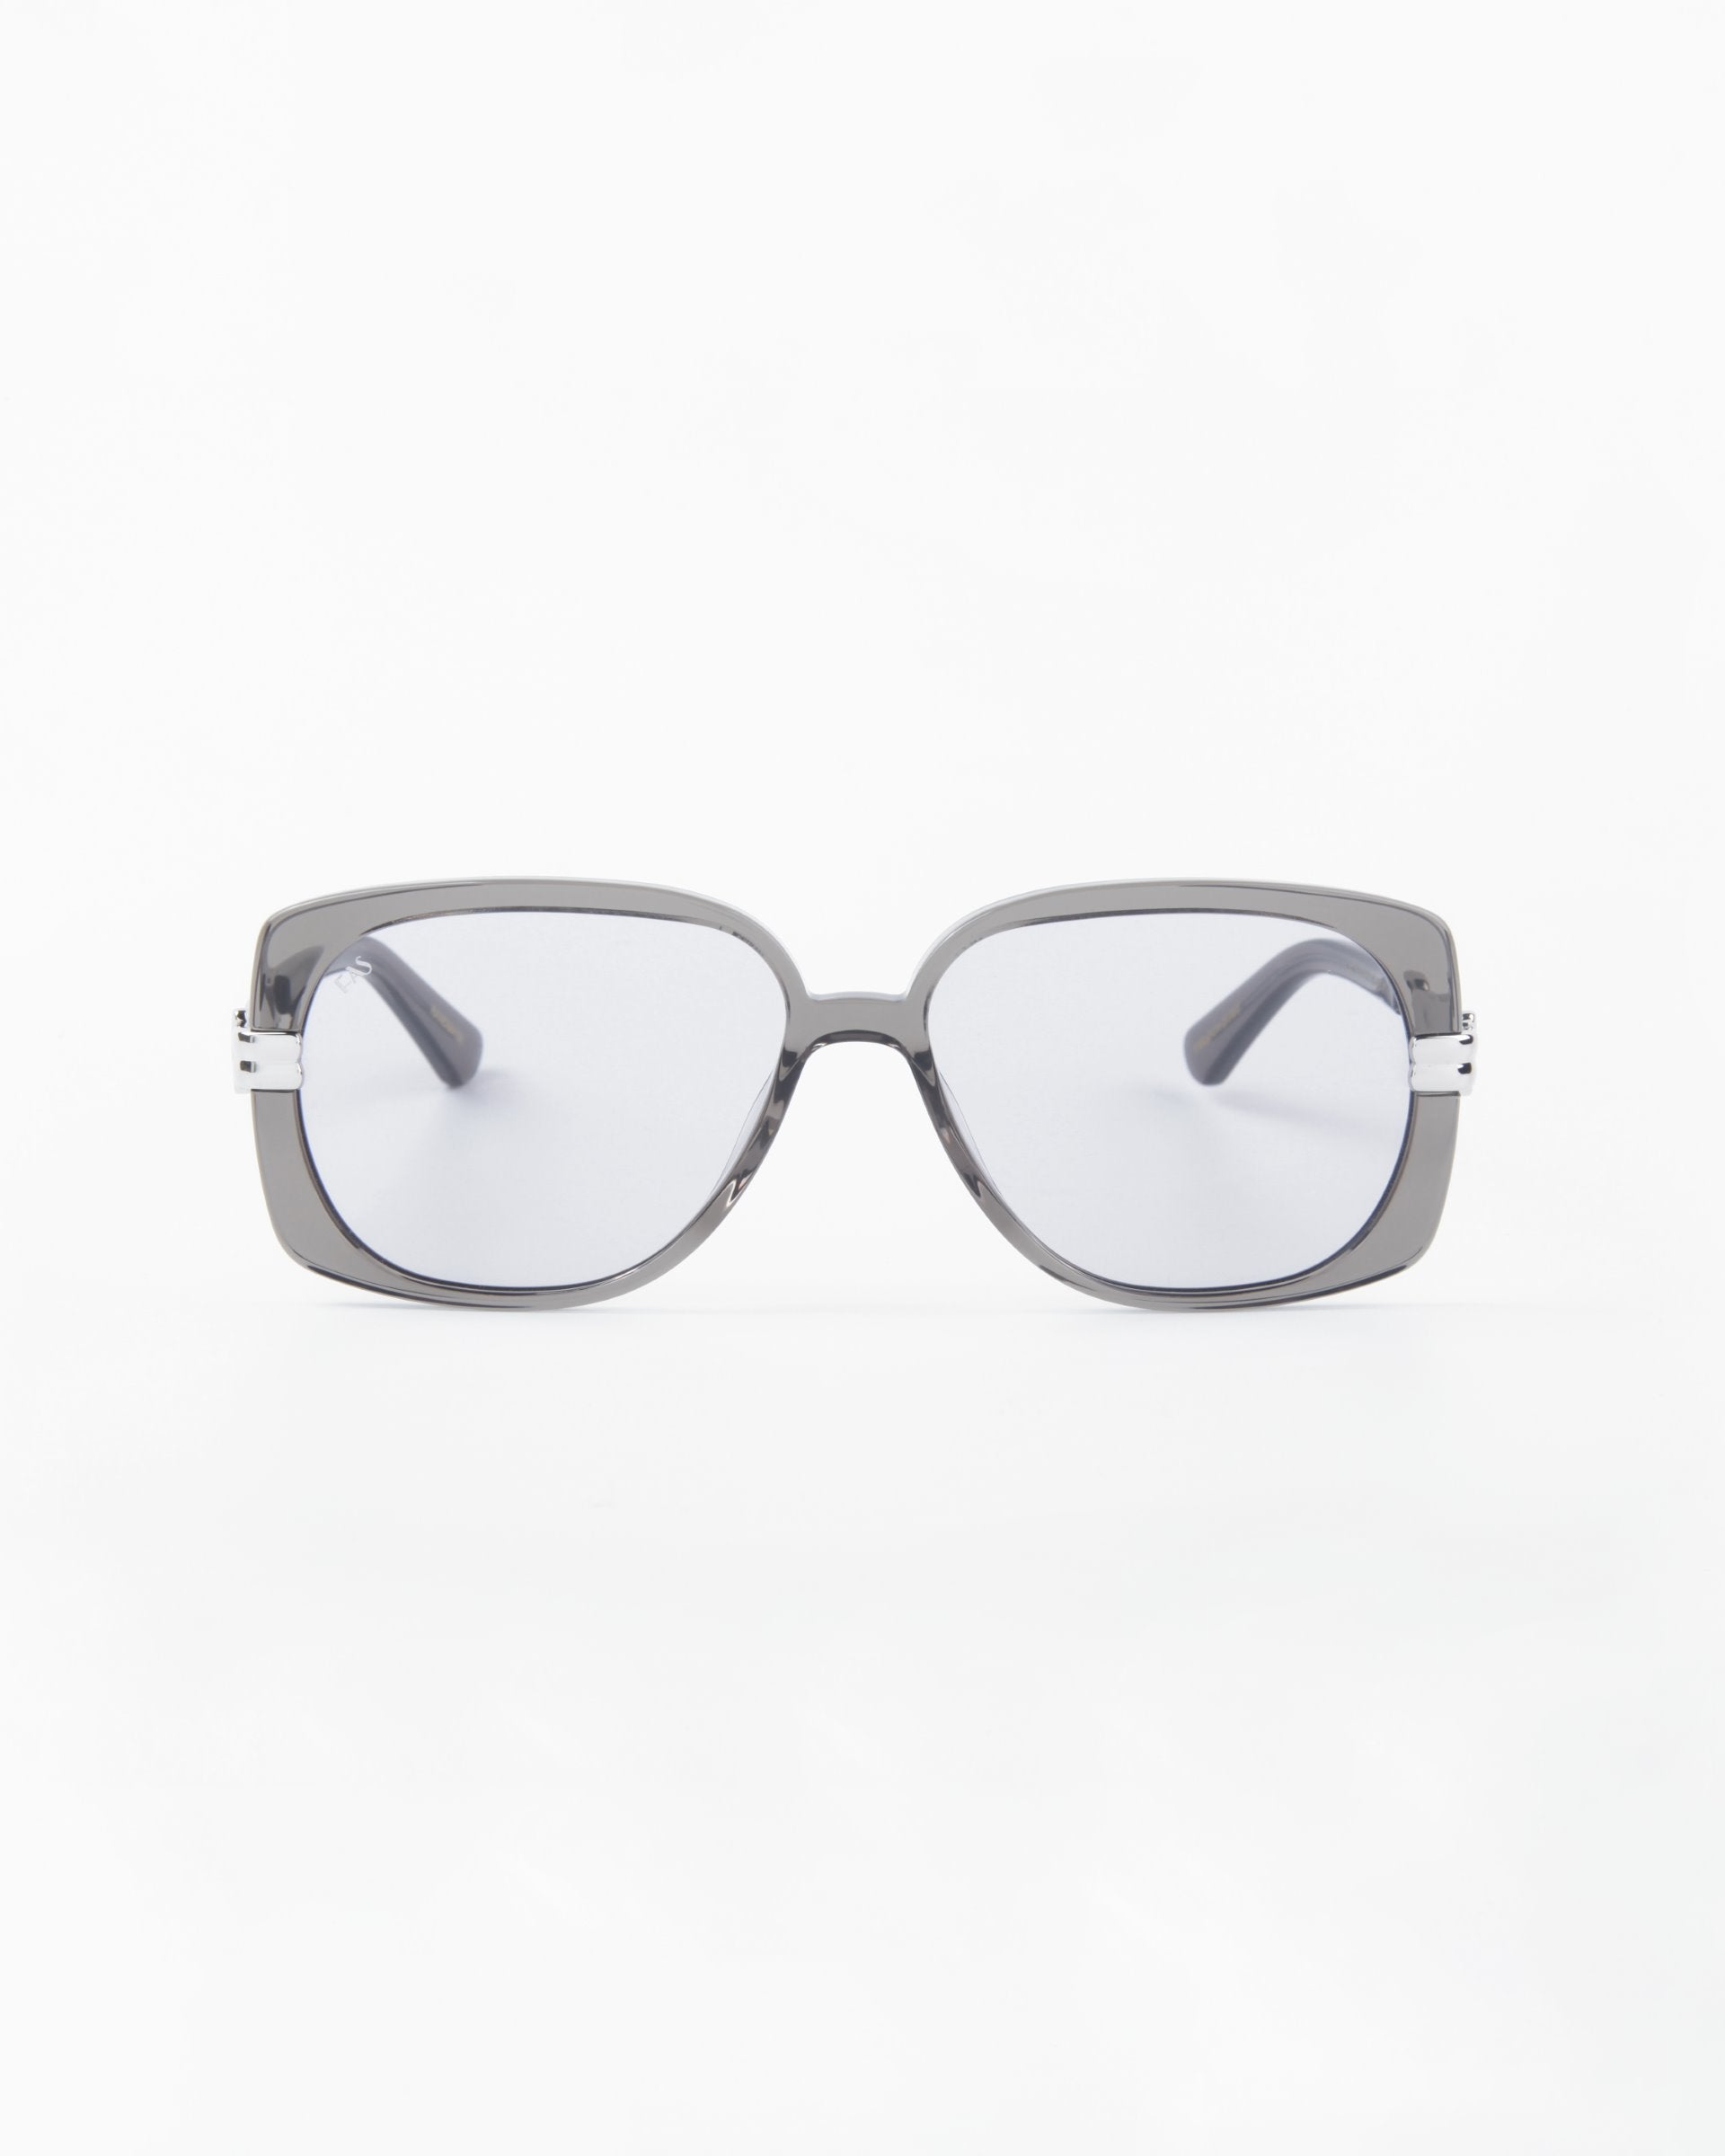 A pair of modern, gray-framed Icon sunglasses by For Art&#39;s Sake® with rectangular, shatter-resistant nylon lenses on a plain white background. The Icon sunglasses by For Art&#39;s Sake® are handmade, boasting a sleek and minimalist design with slightly curved arms and a polished finish.